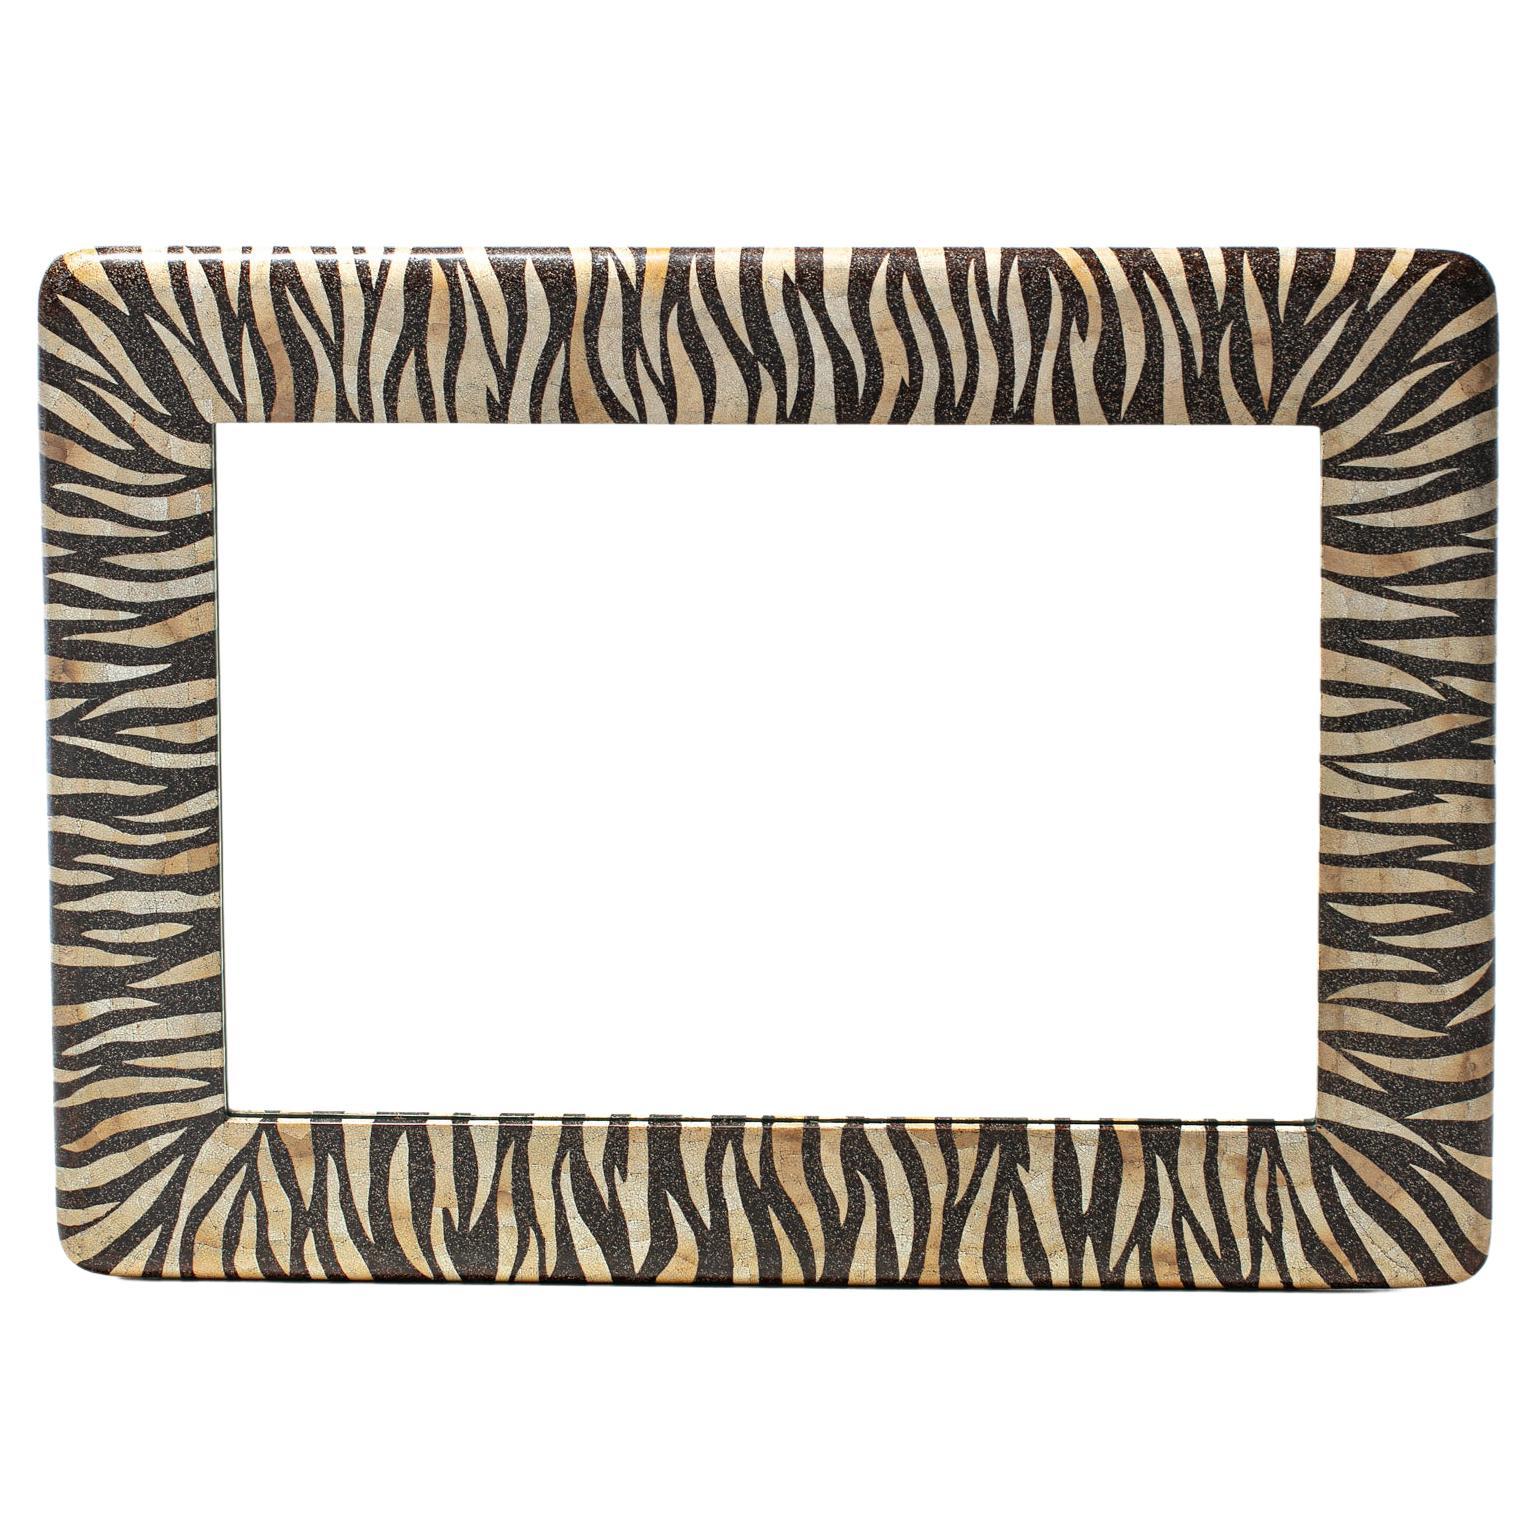 Organic Modern Hand Made Zebra Pattern Mirror Made of Eggshells by Maitland Smith For Sale